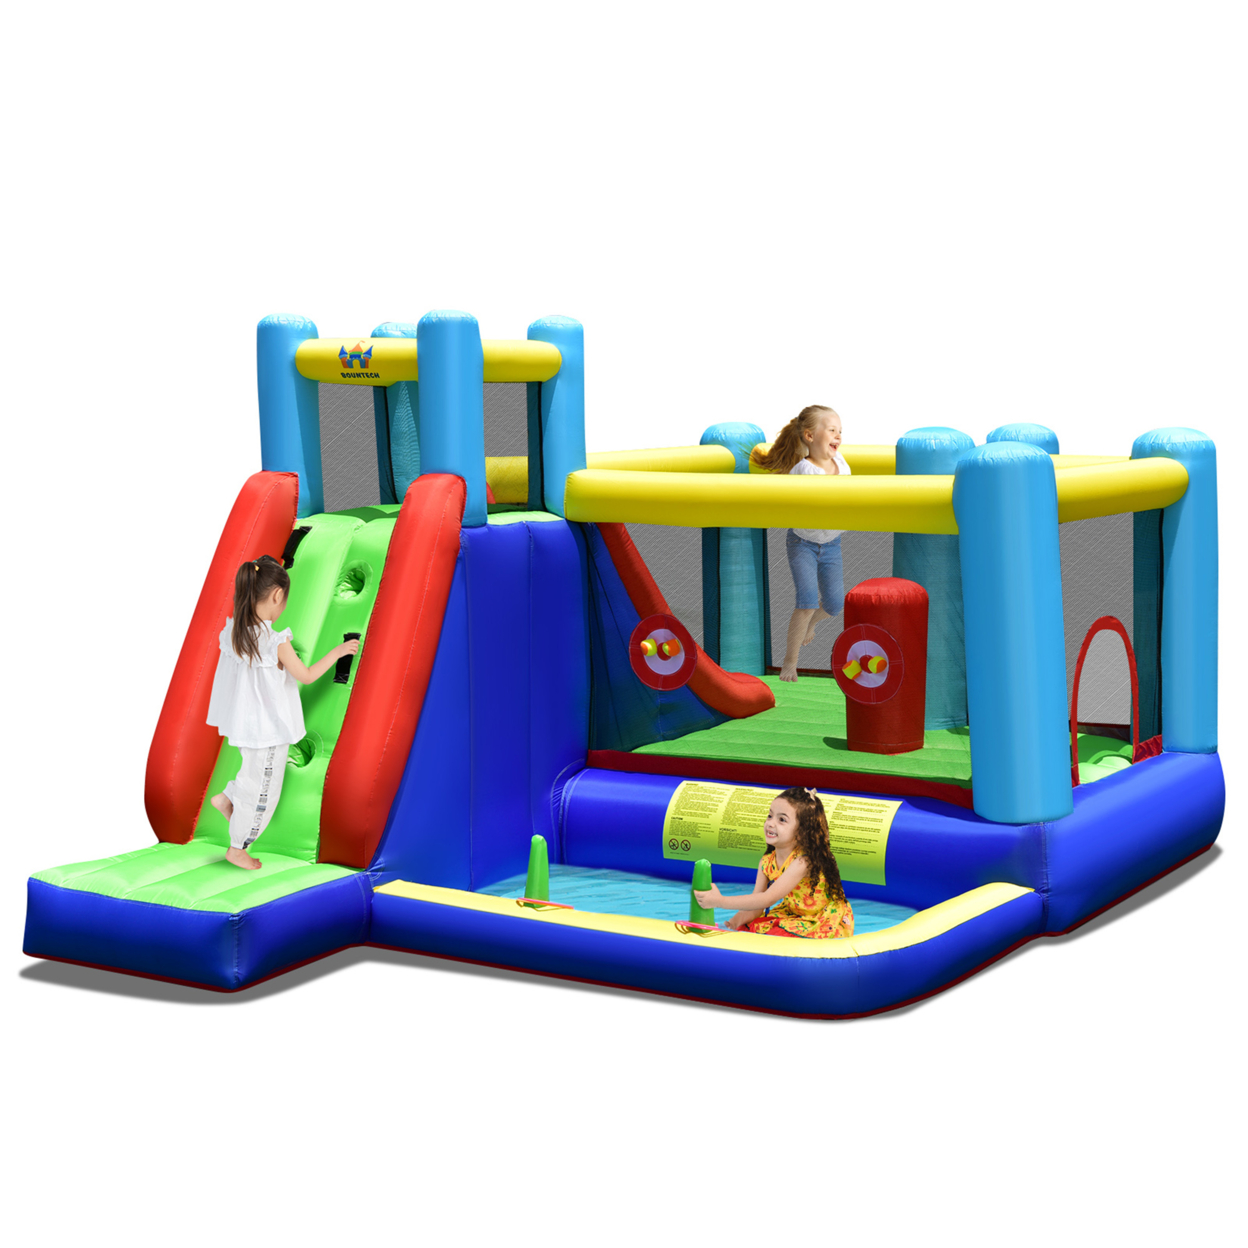 8-in-1 Kids Inflatable Bounce House Bouncy Castle Indoor Outdoor Without Blower